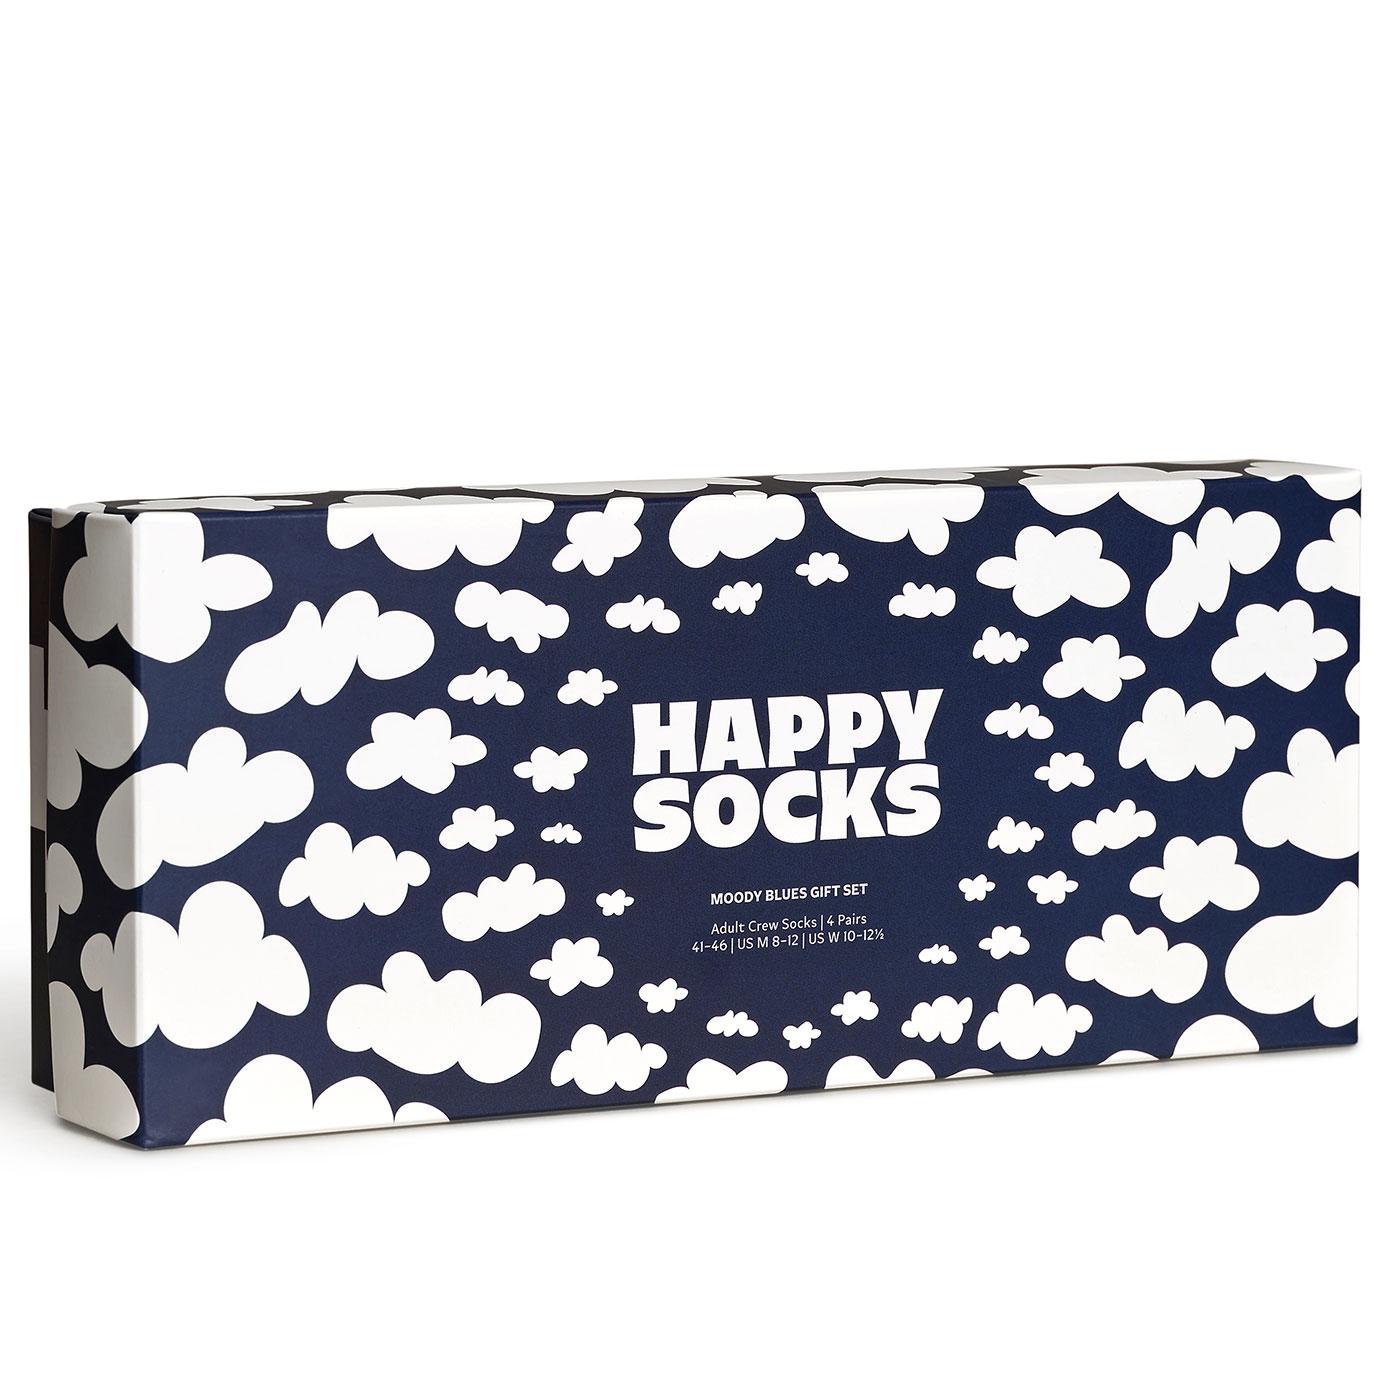 Happy Socks Moody Blues Four Navy Set Pack Blue Boxed Gift